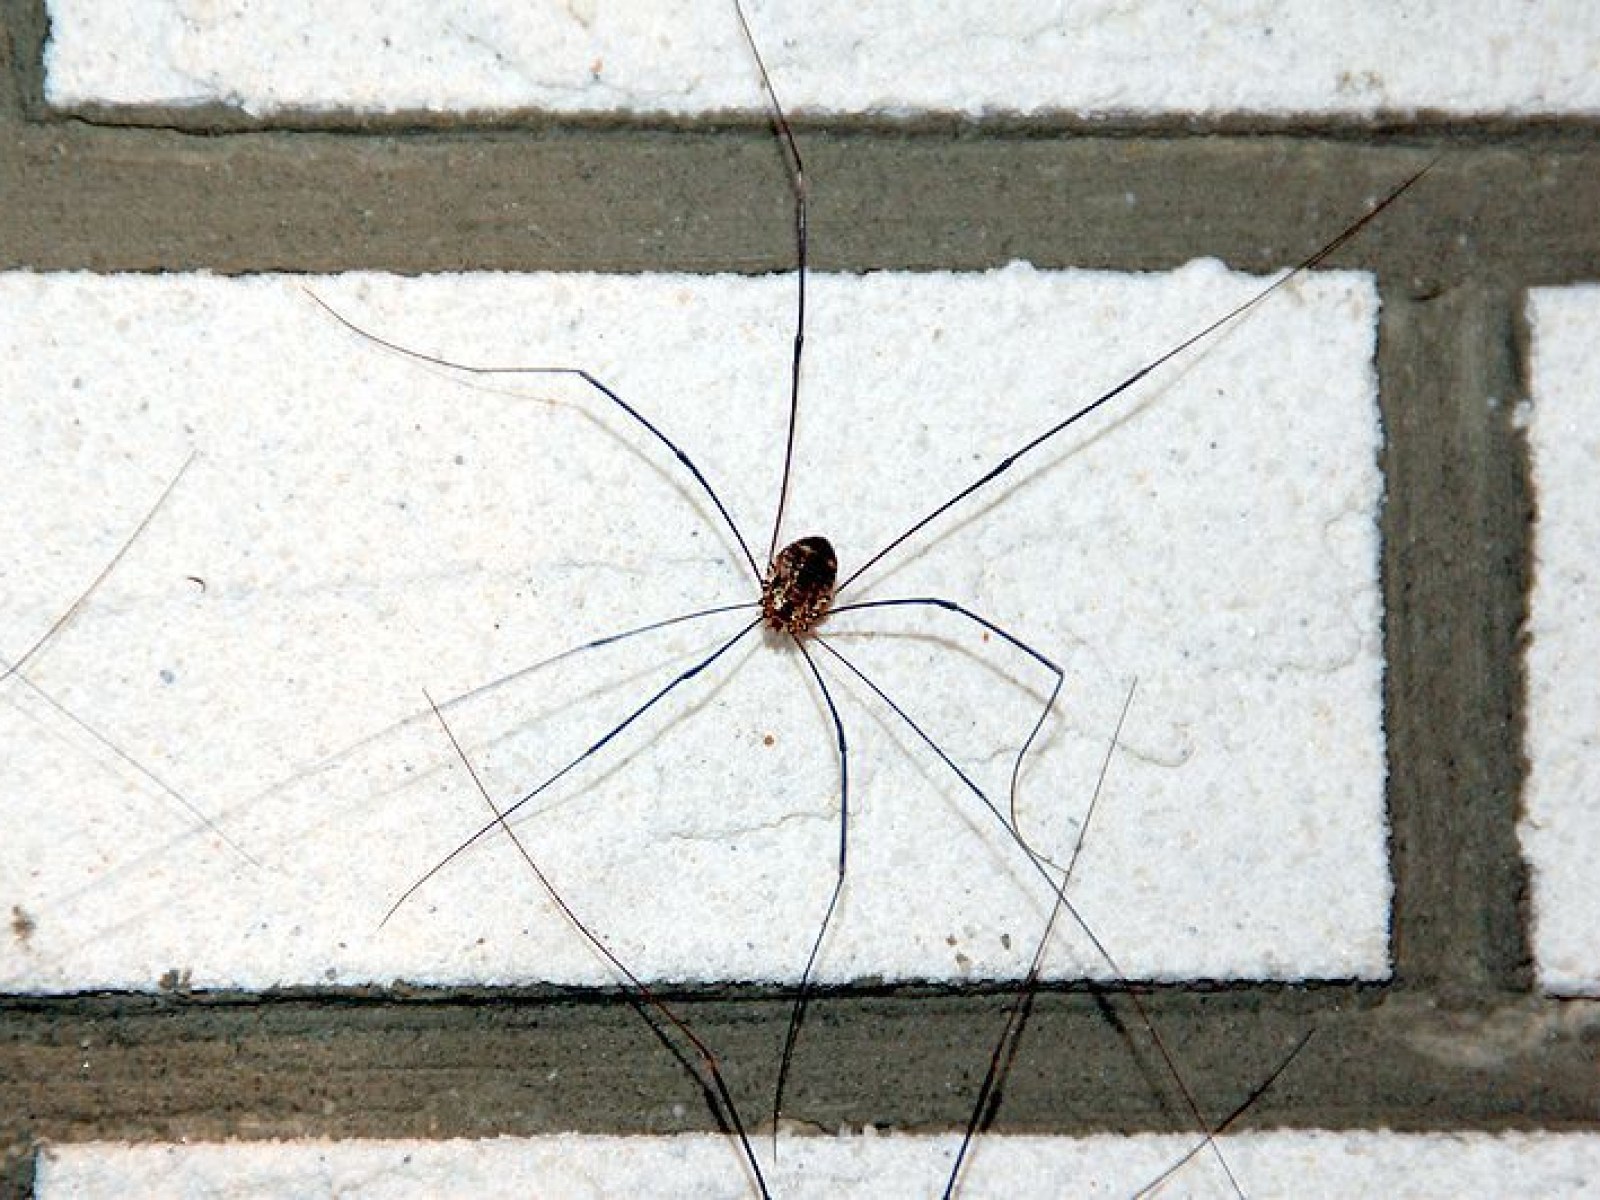 Daddy Longlegs: Everything You Need to Know